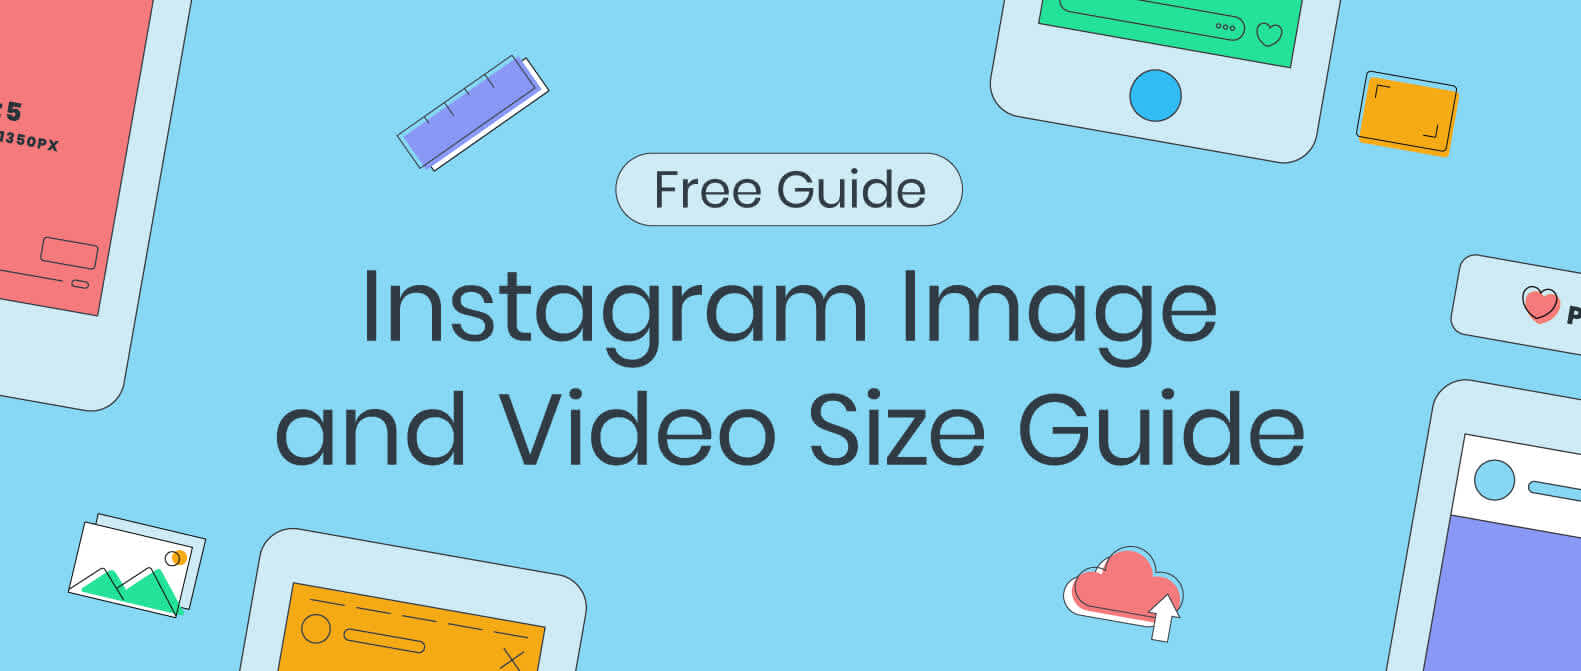 Image reading Free Guide: Instagram Image and Video Size Guide